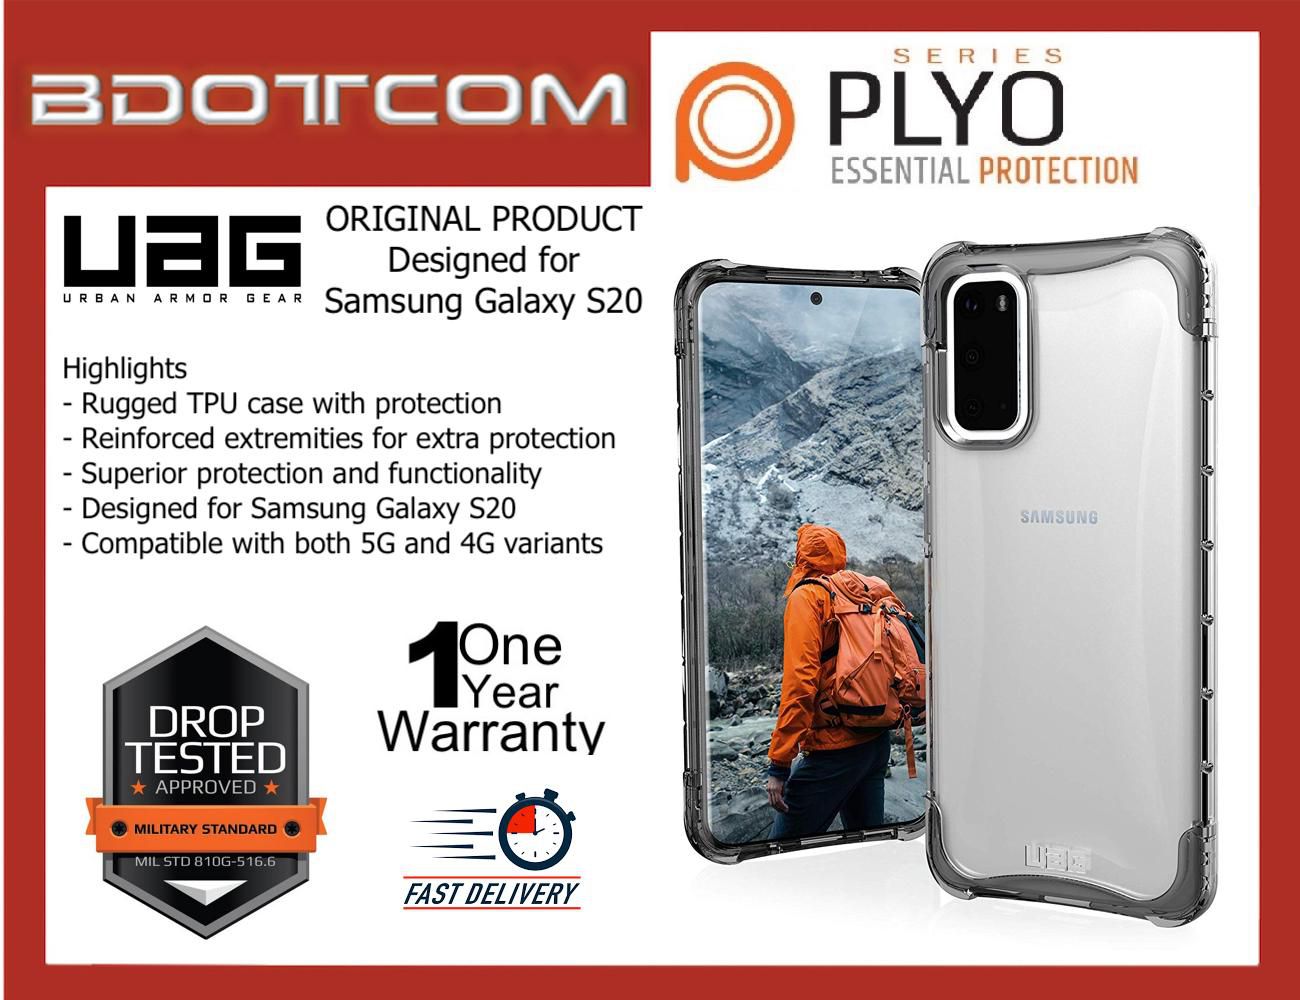 PLYO Series Protective Cover Case for Samsung Galaxy S20